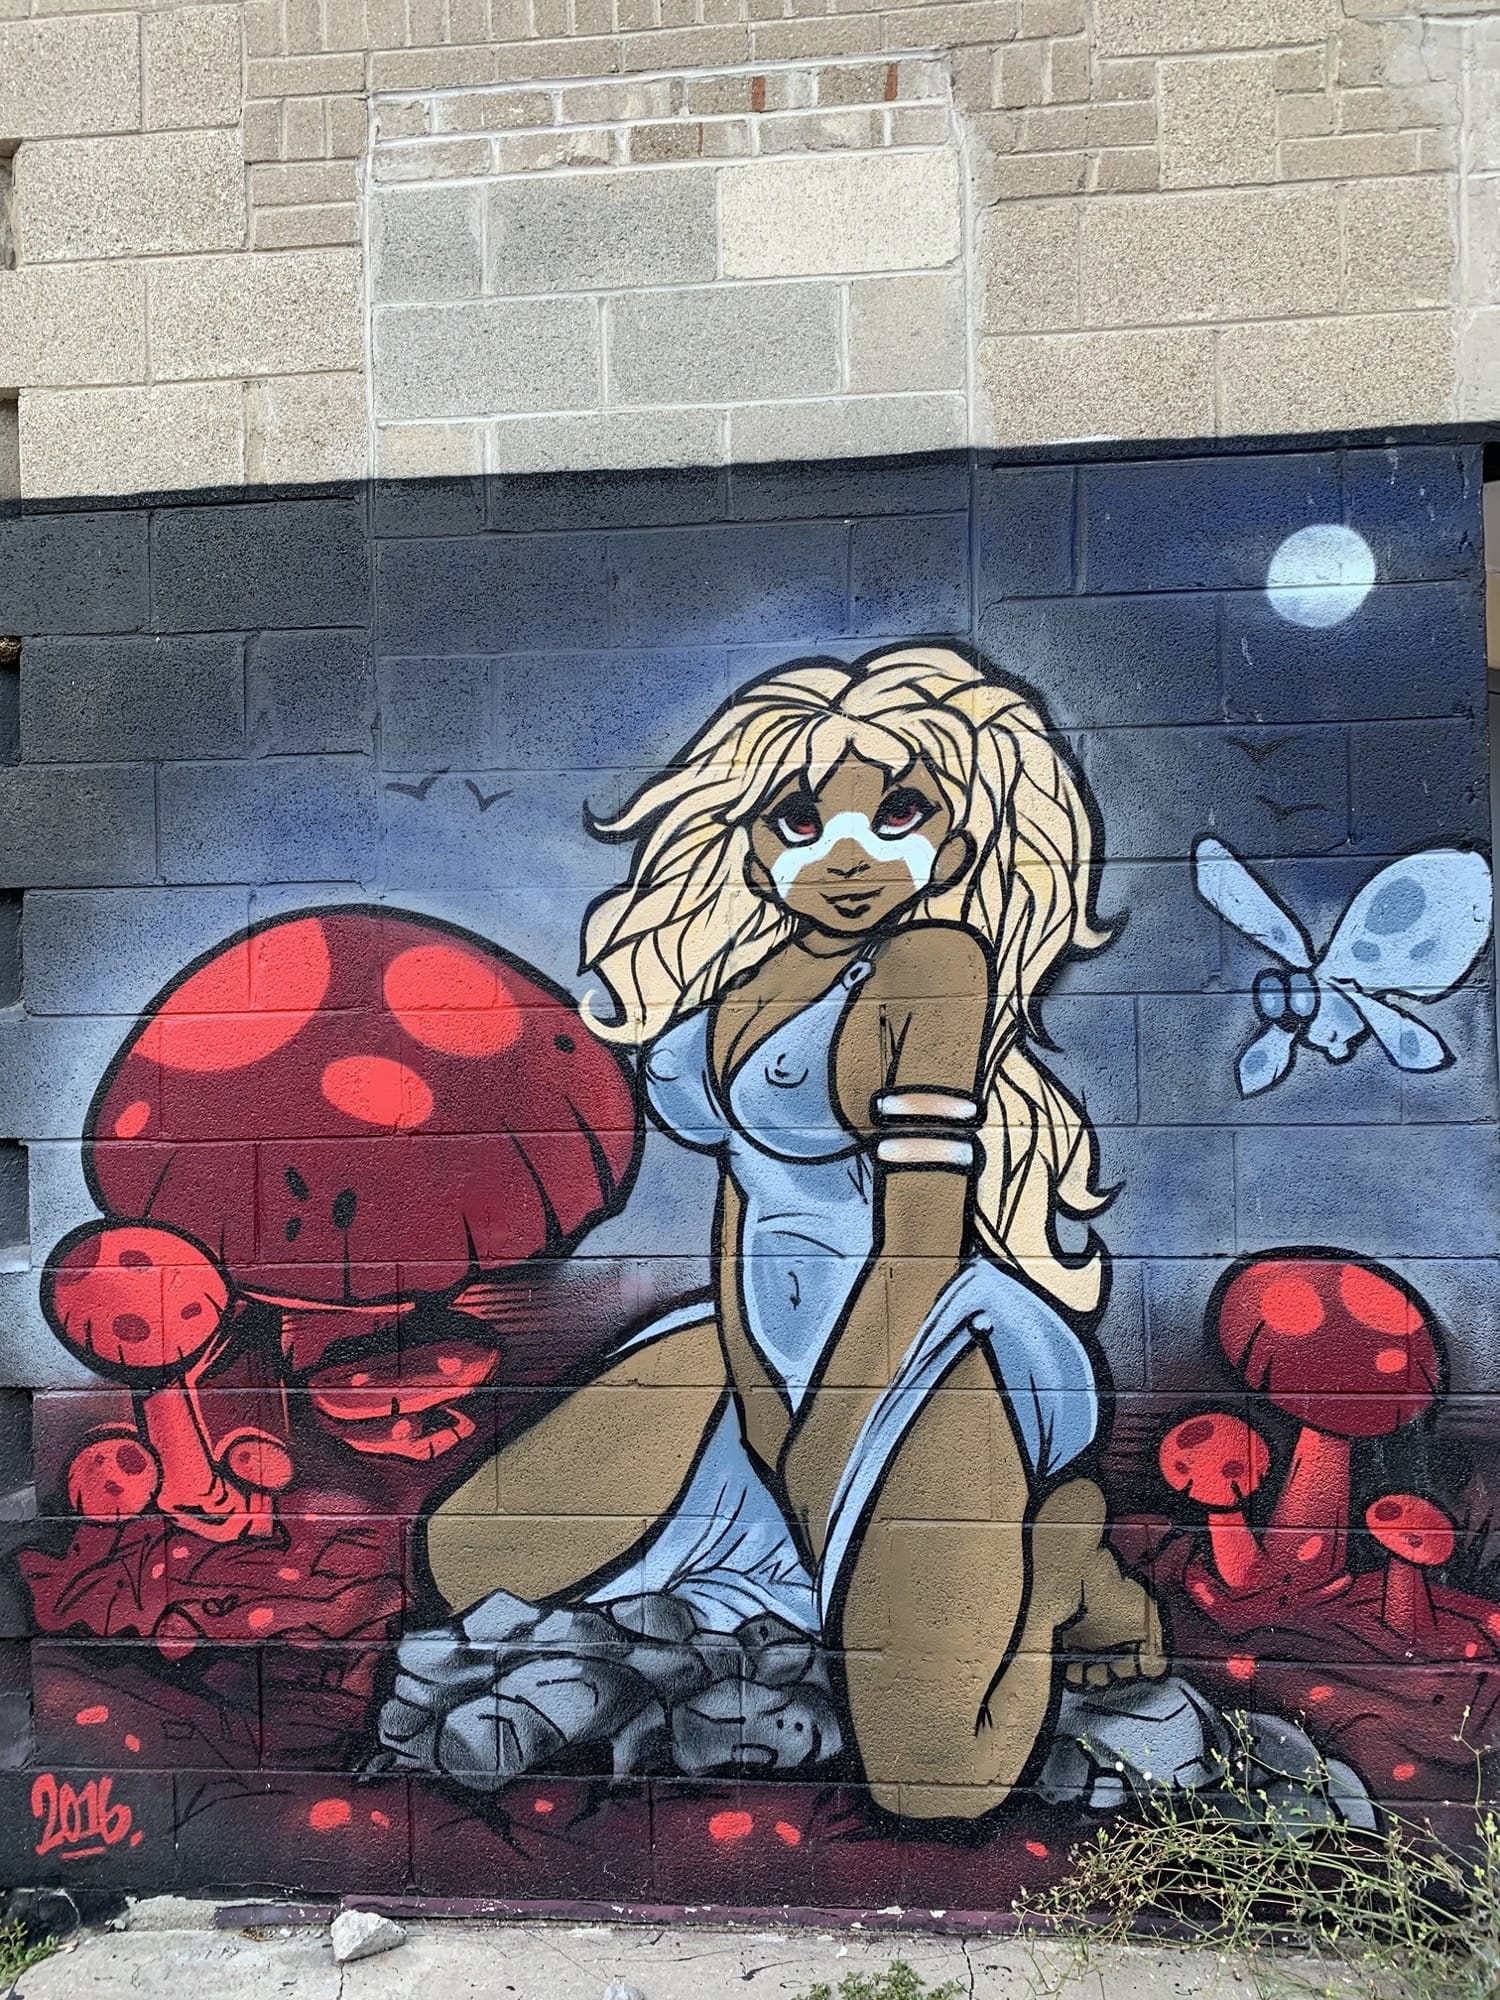 Graffiti 2473  captured by Rabot in Toronto Canada